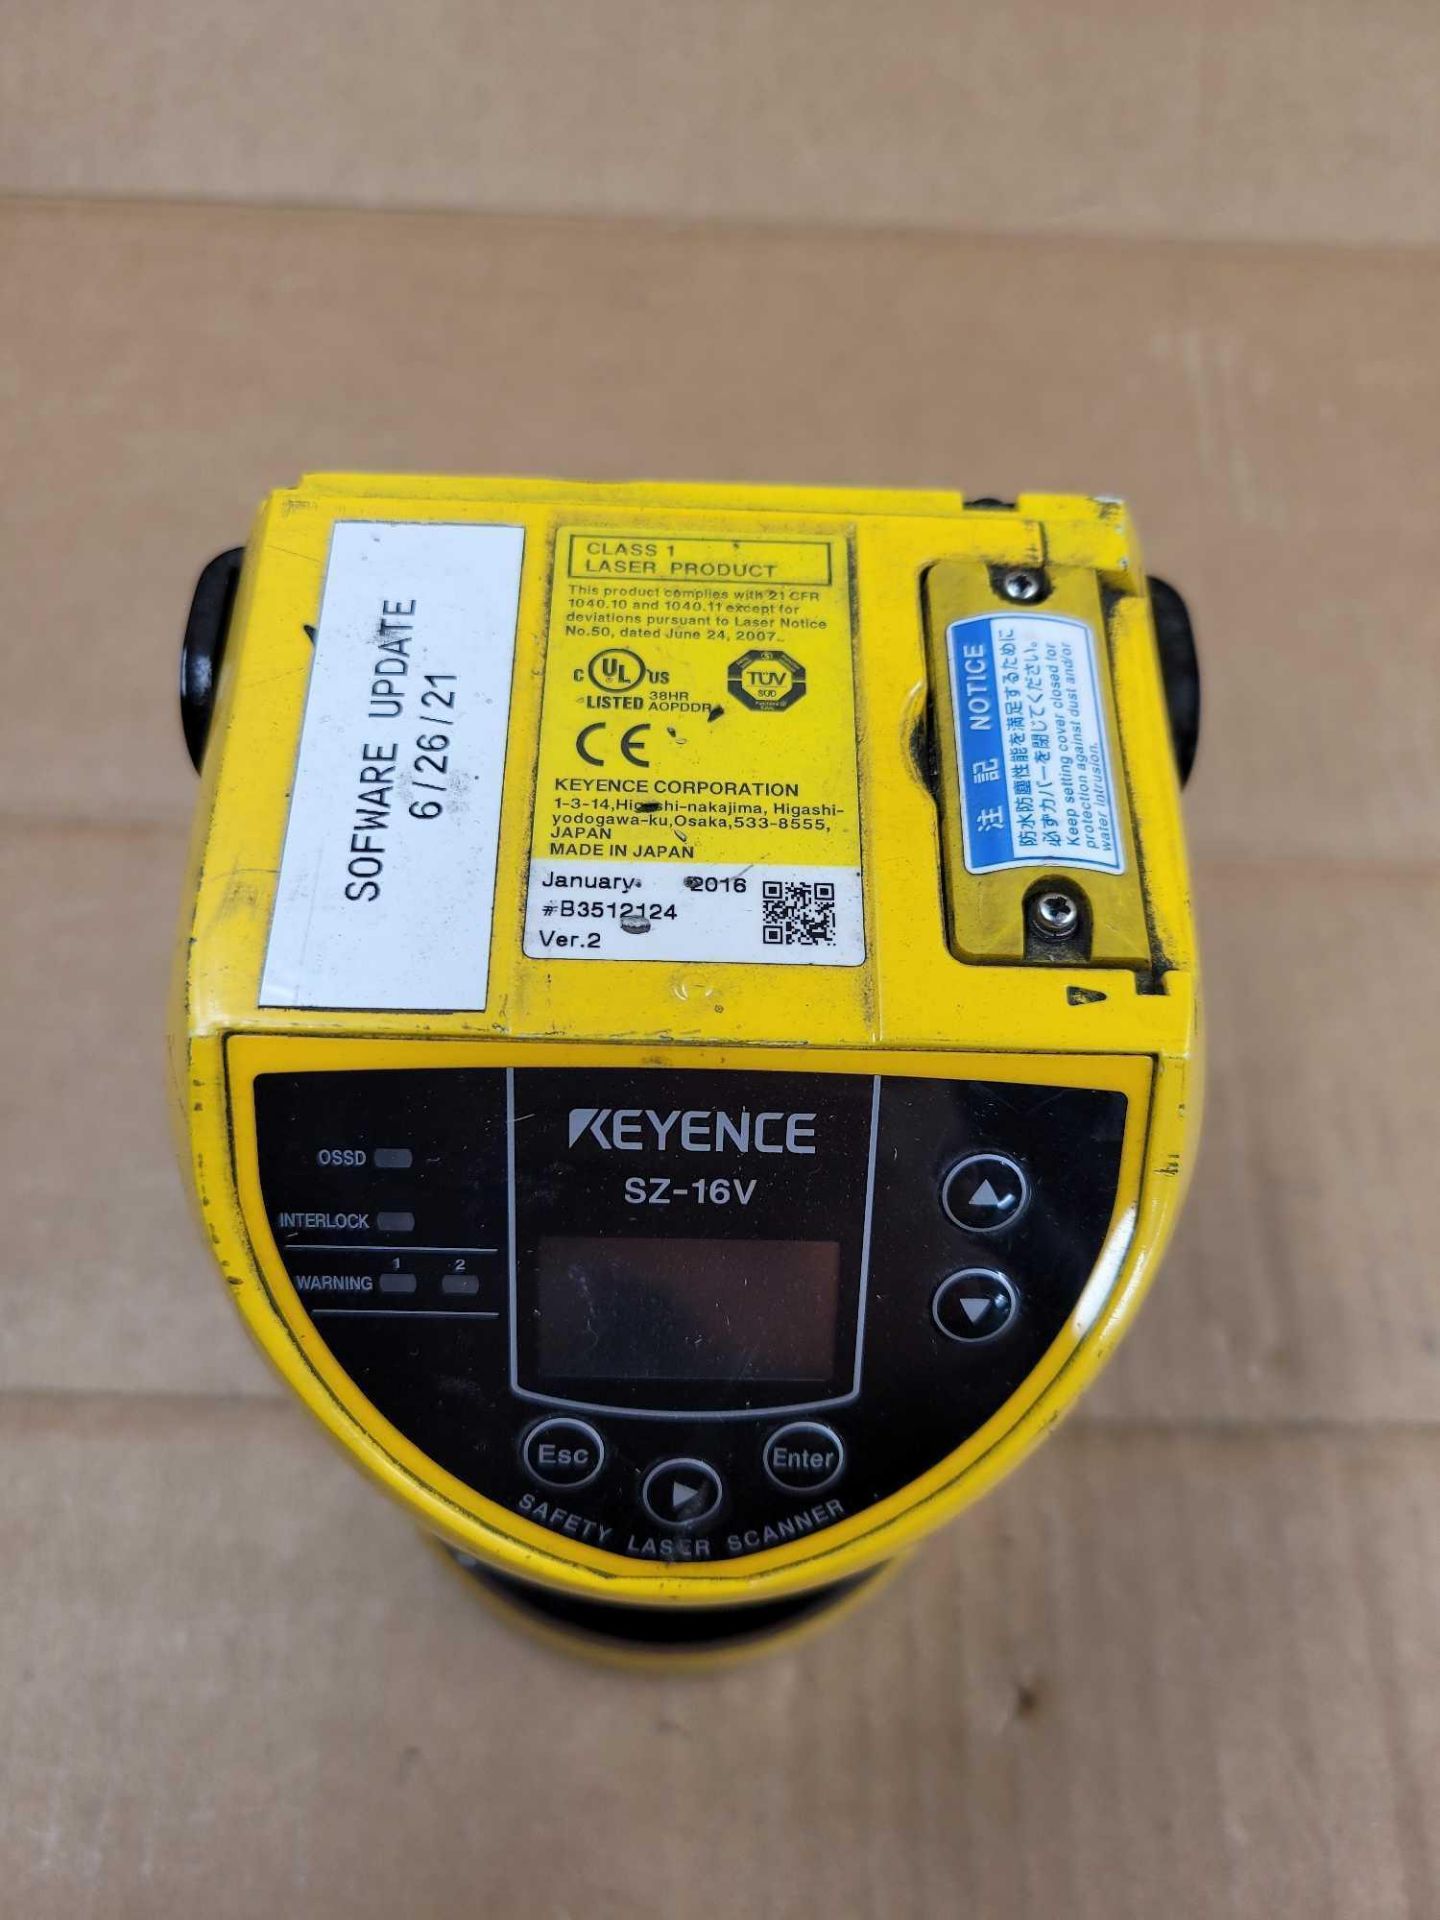 KEYENCE SZ-16V / Safety Laser Scanner  /  Lot Weight: 4.2 lbs - Image 7 of 7